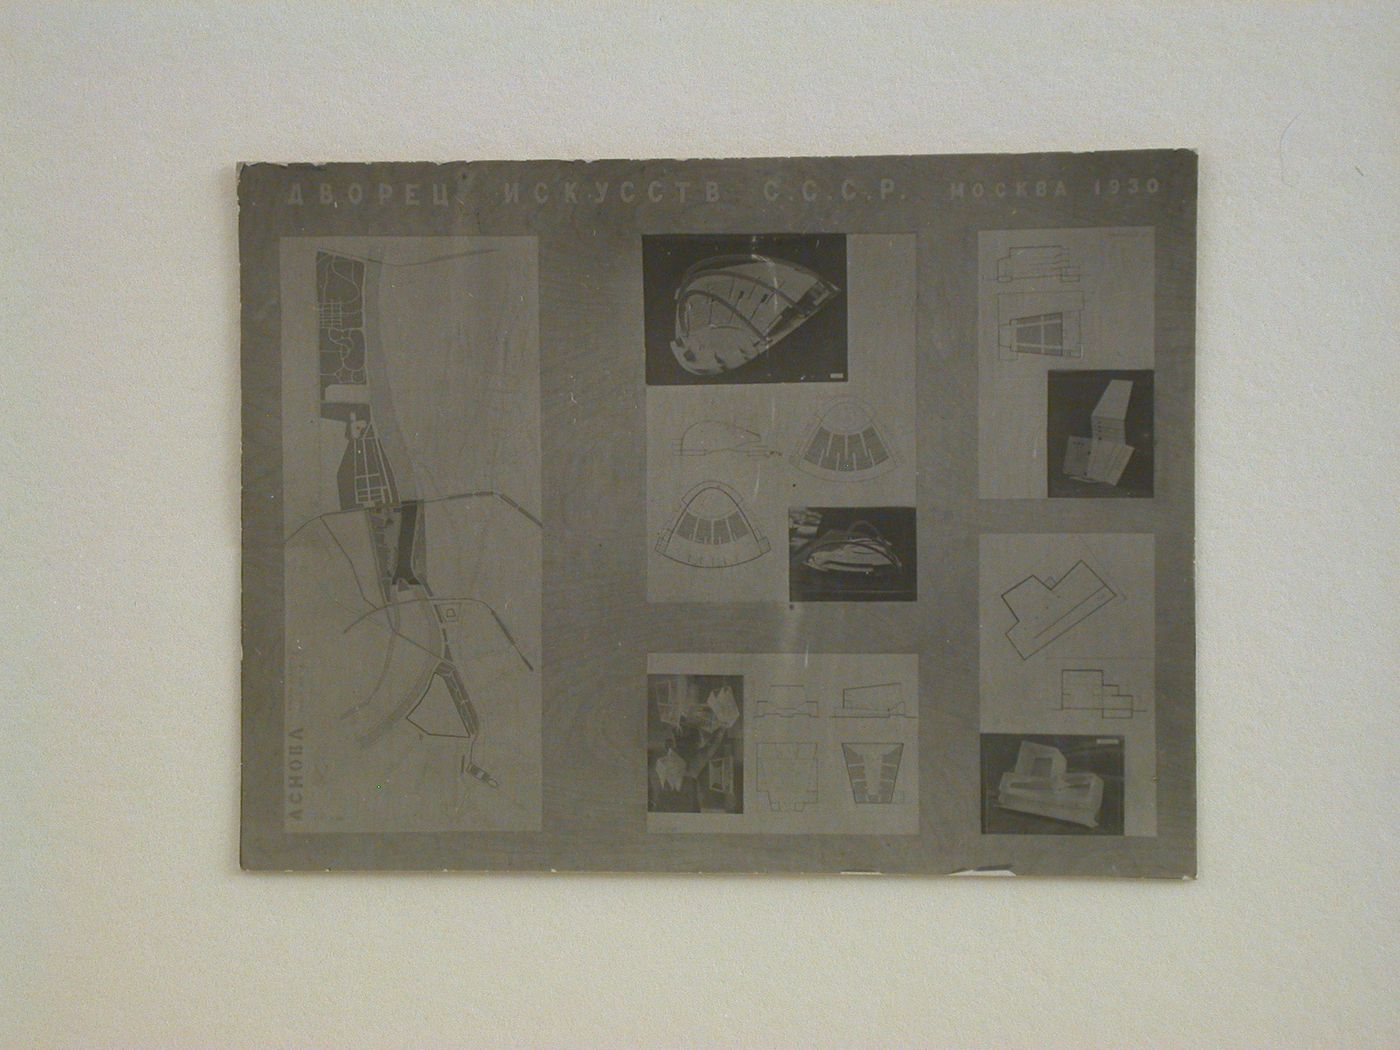 Photograph of a presentation board showing a site plan, plans, sections and photographs of models for a competition [?] for an All-Union Palace of the Arts, Moscow